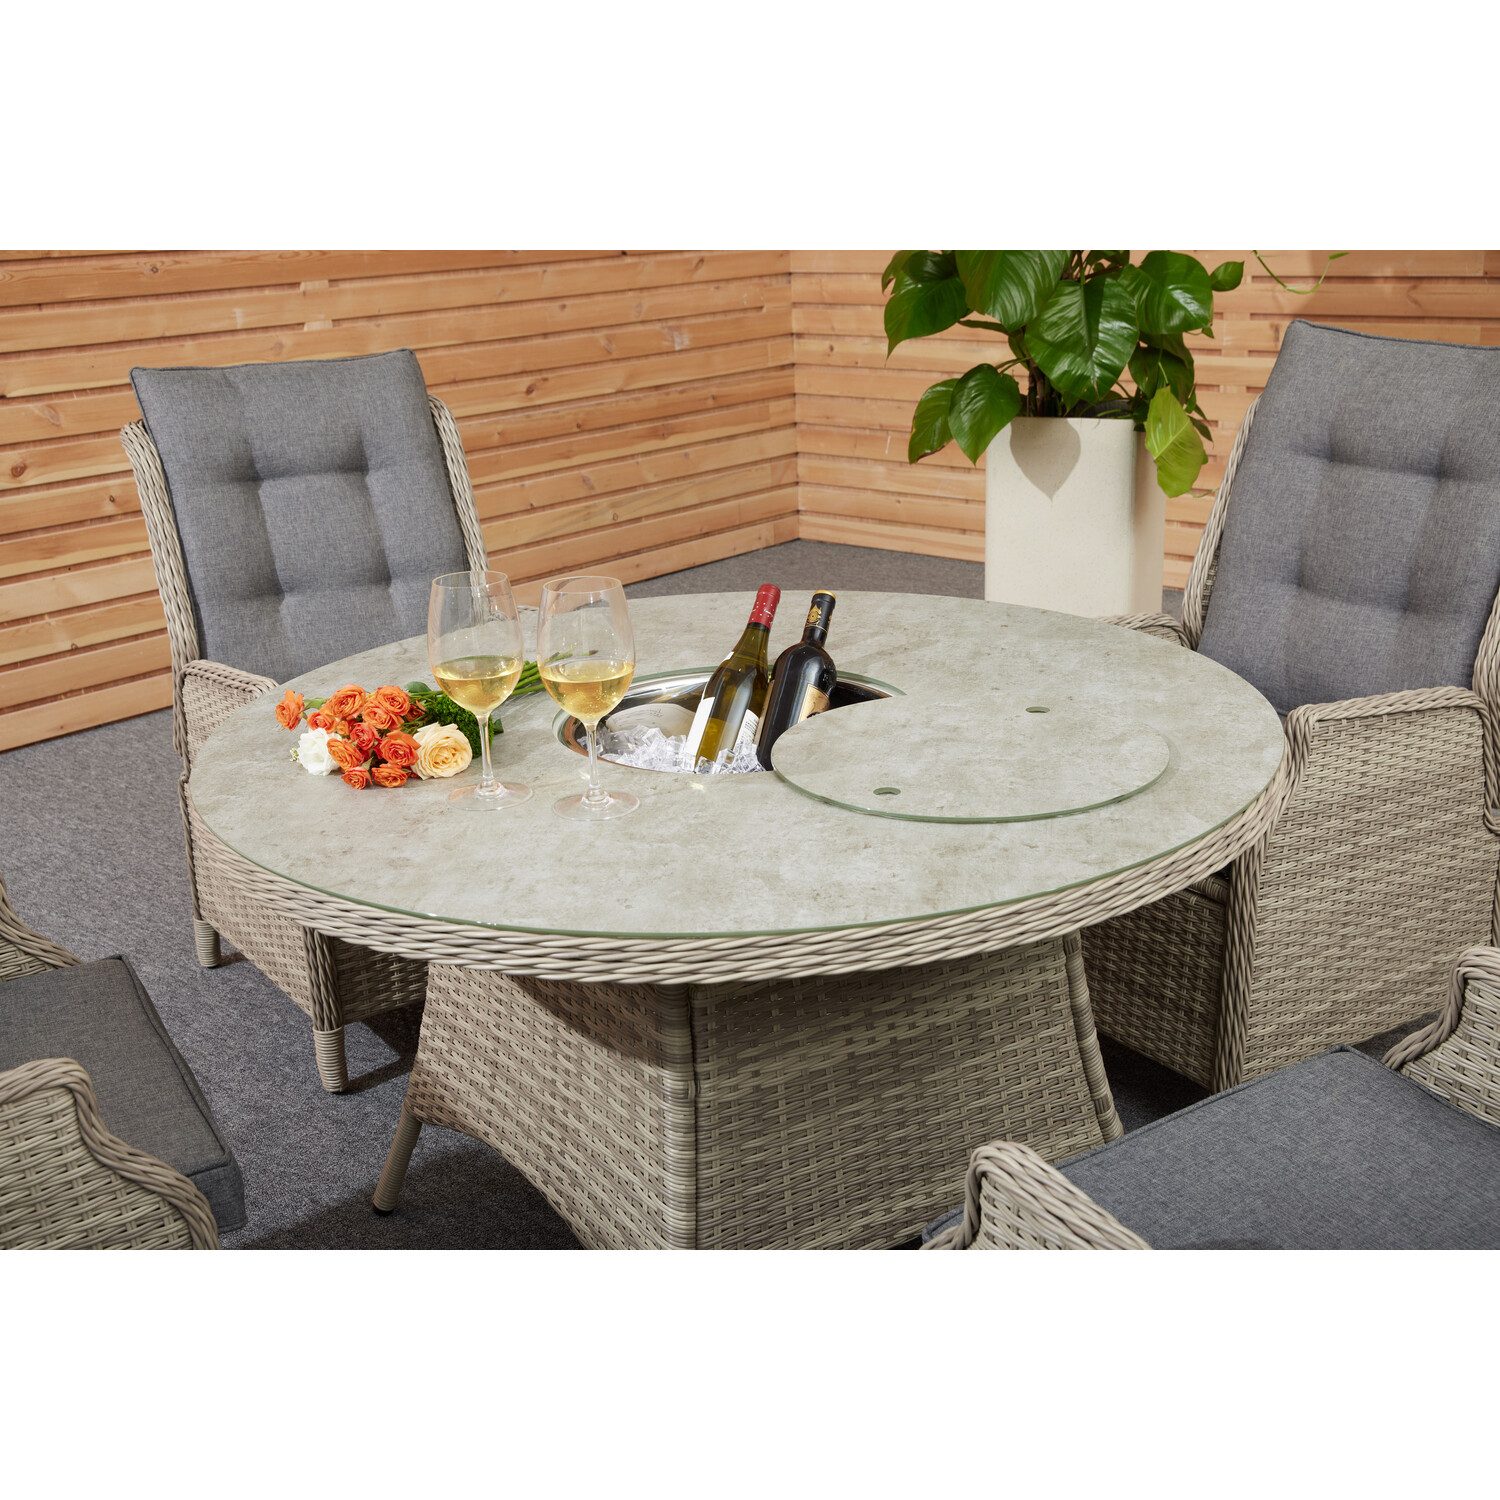 Malay Deluxe Malay Deluxe Cambridge Wicker 4 Seater Reclining Dining Set Natural Image 4